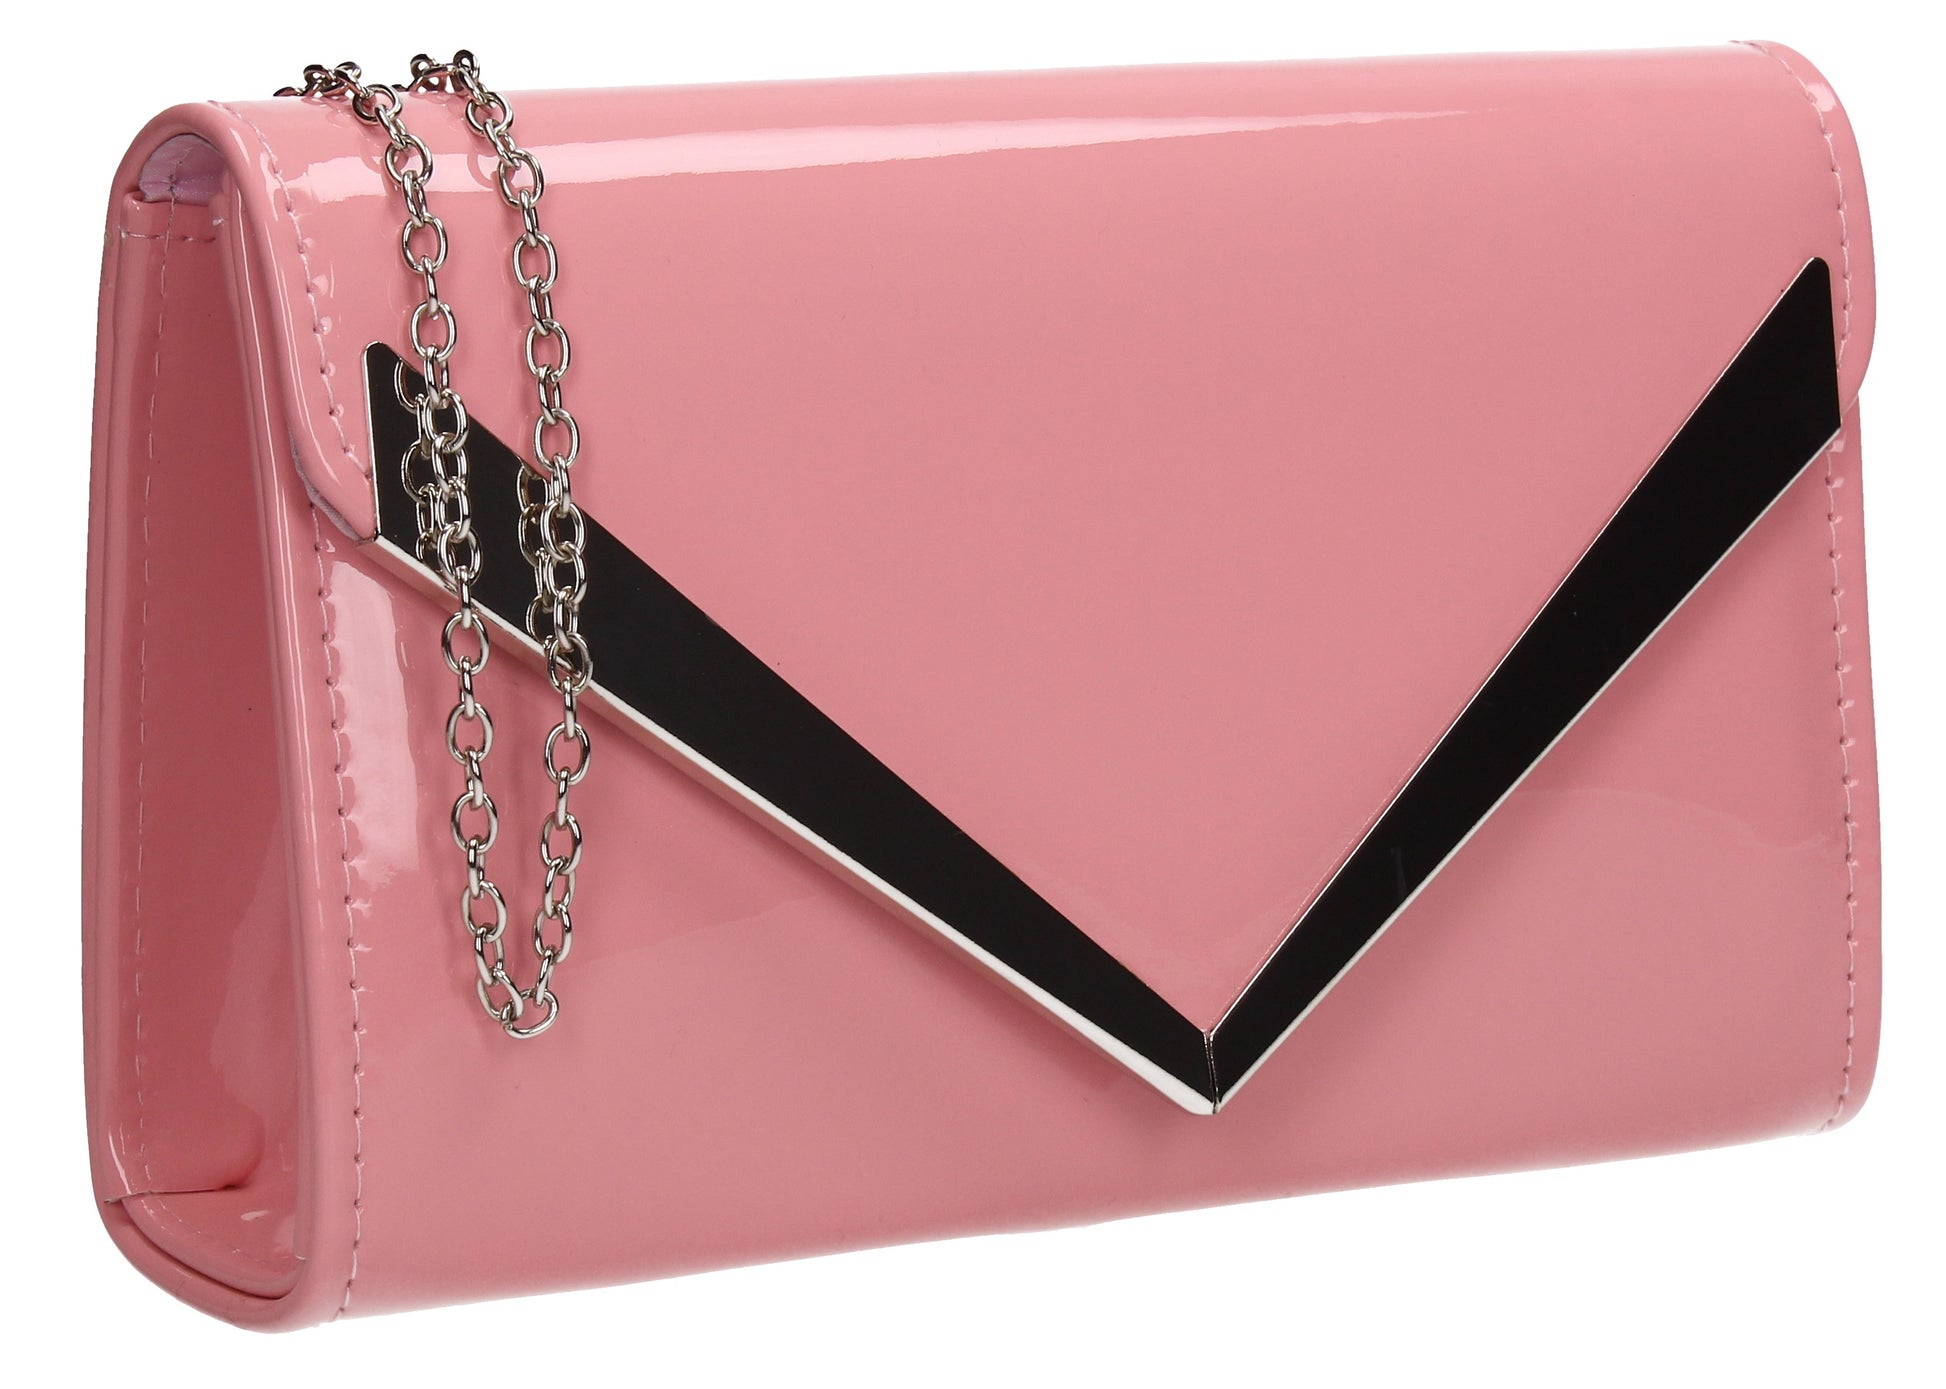 SWANKYSWANS Wendy V Patent Clutch Bag Pink Cute Cheap Clutch Bag For Weddings School and Work